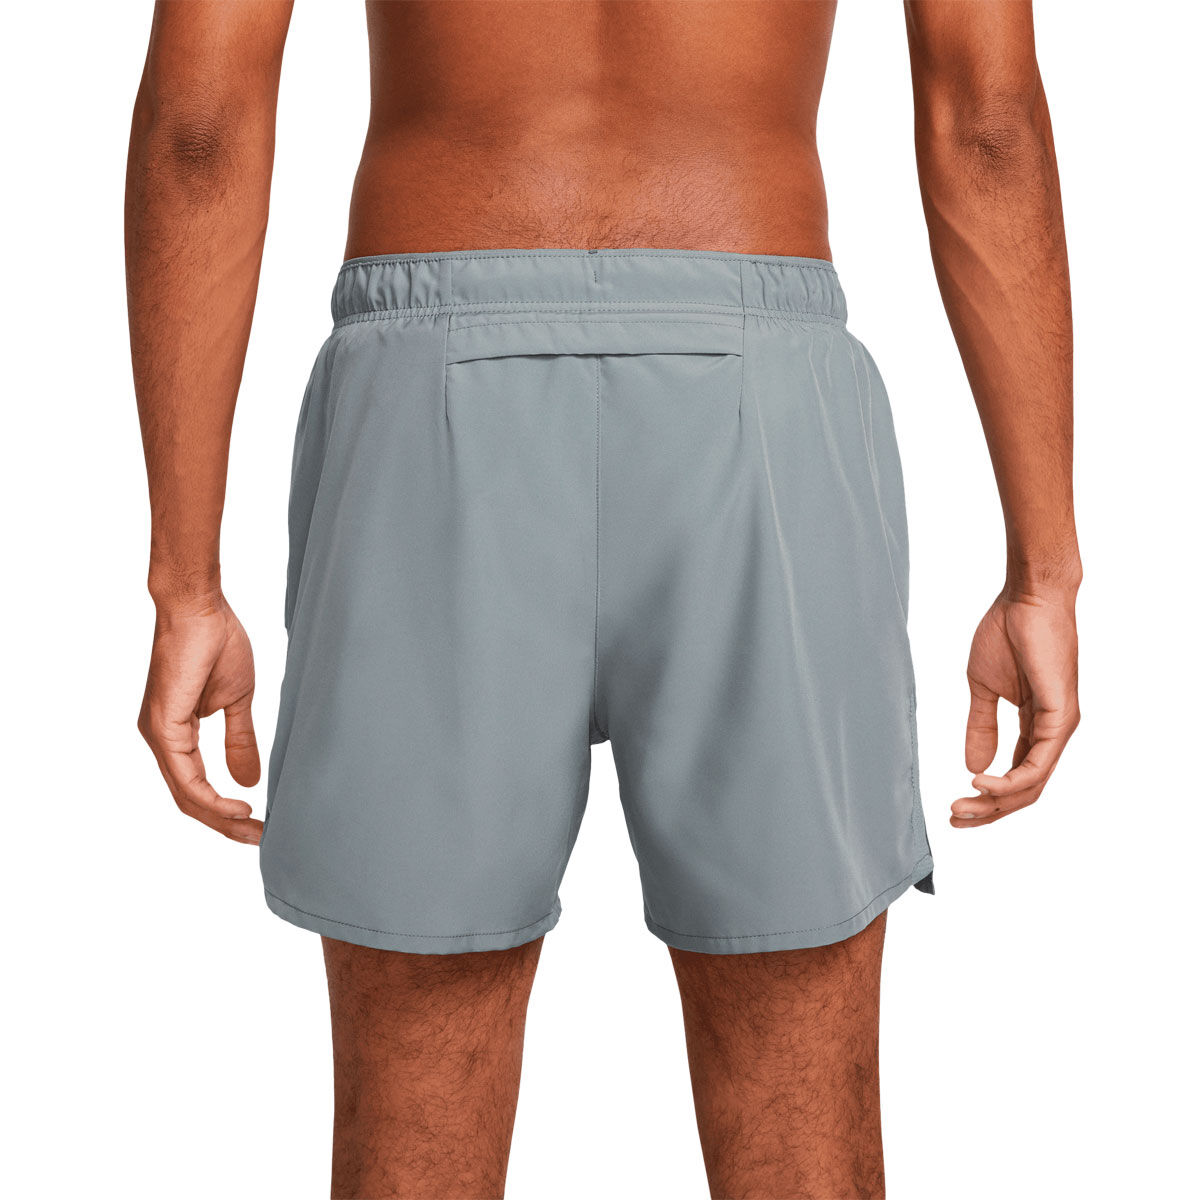 Buy Nike Challenger Men's Brief-Lined Running Shorts at